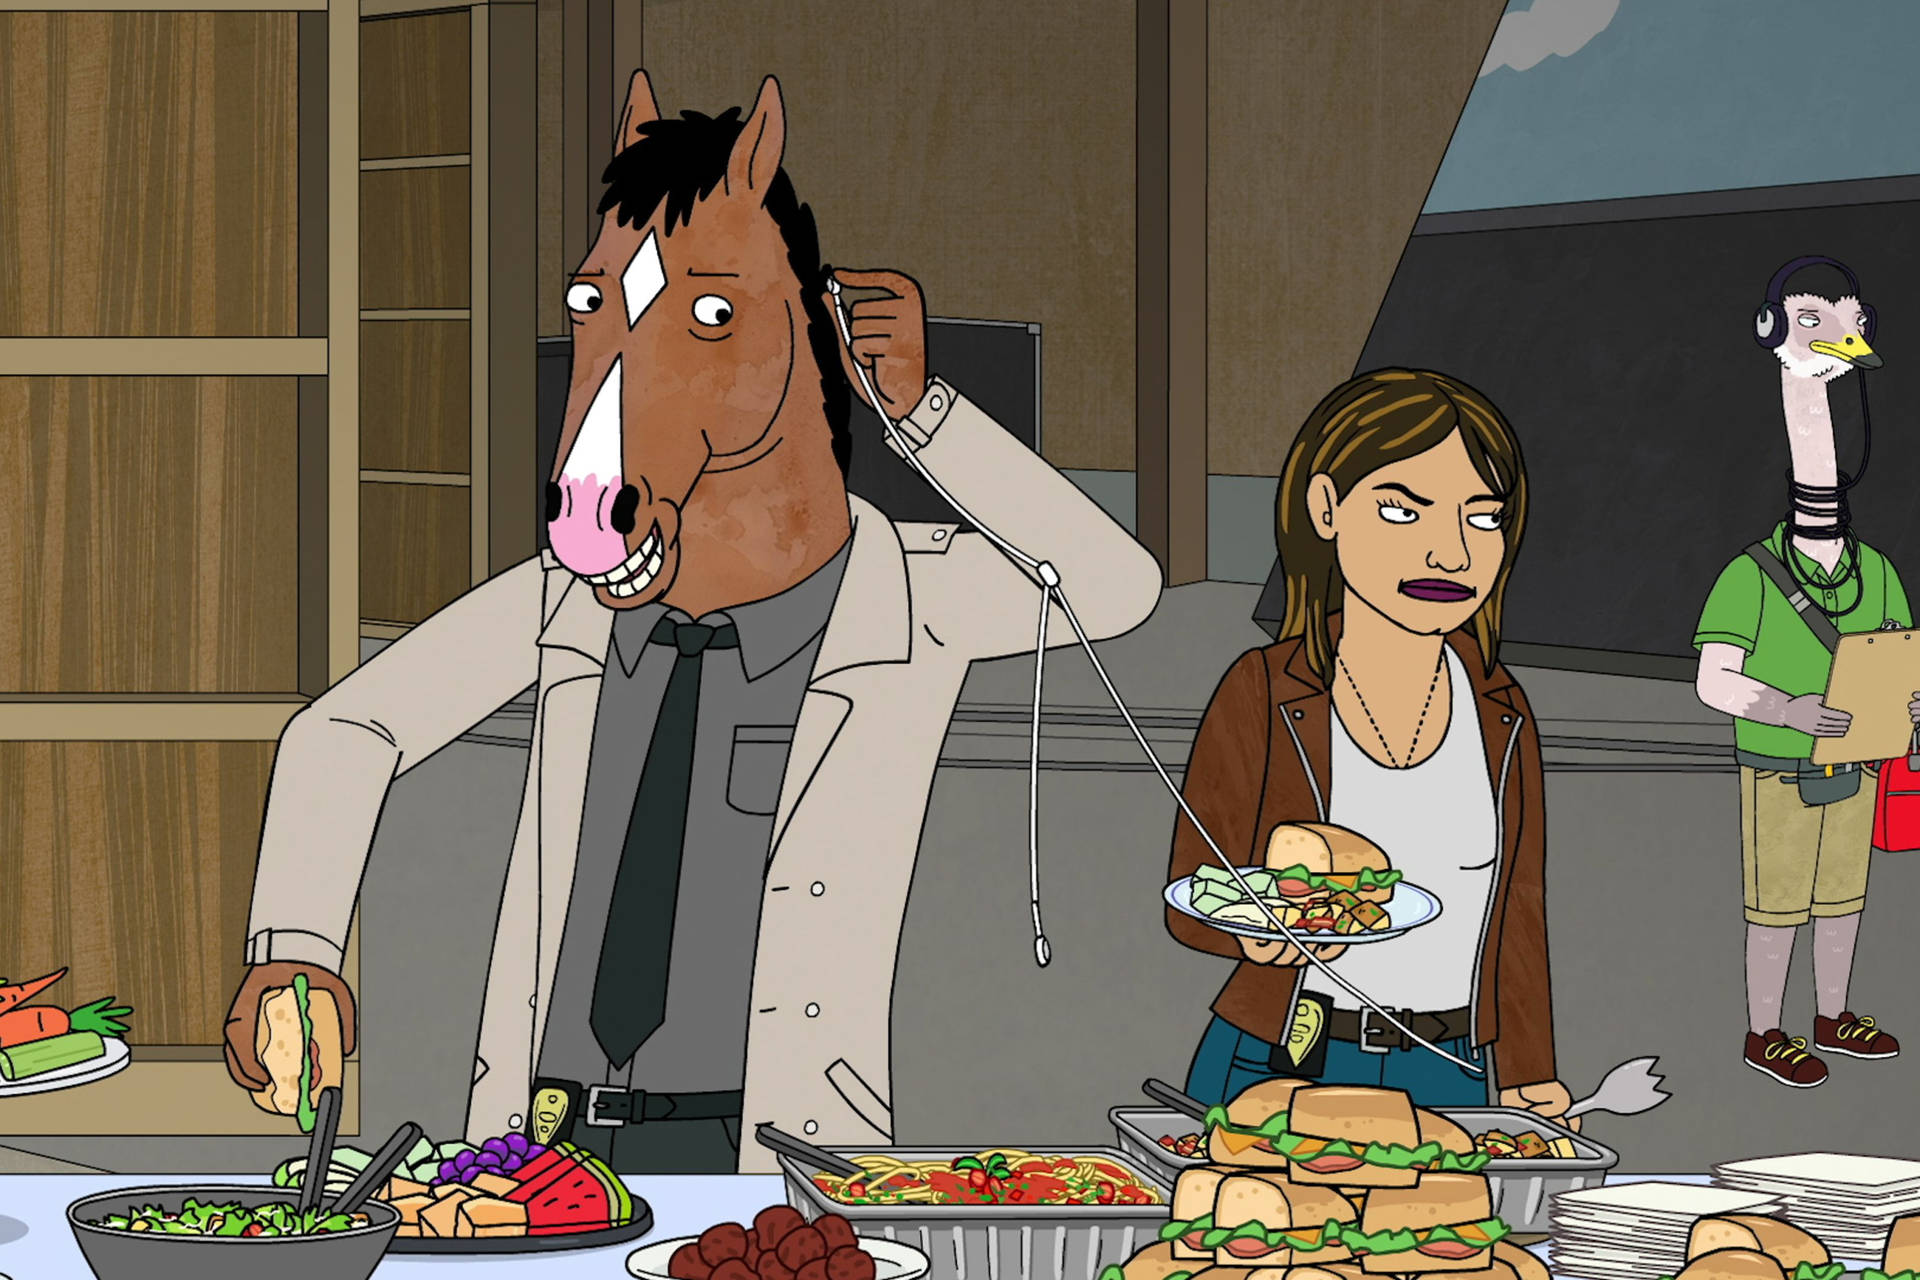 Bojack Horseman And Gina Push Their Limits As They Share An Electric Moment. Background